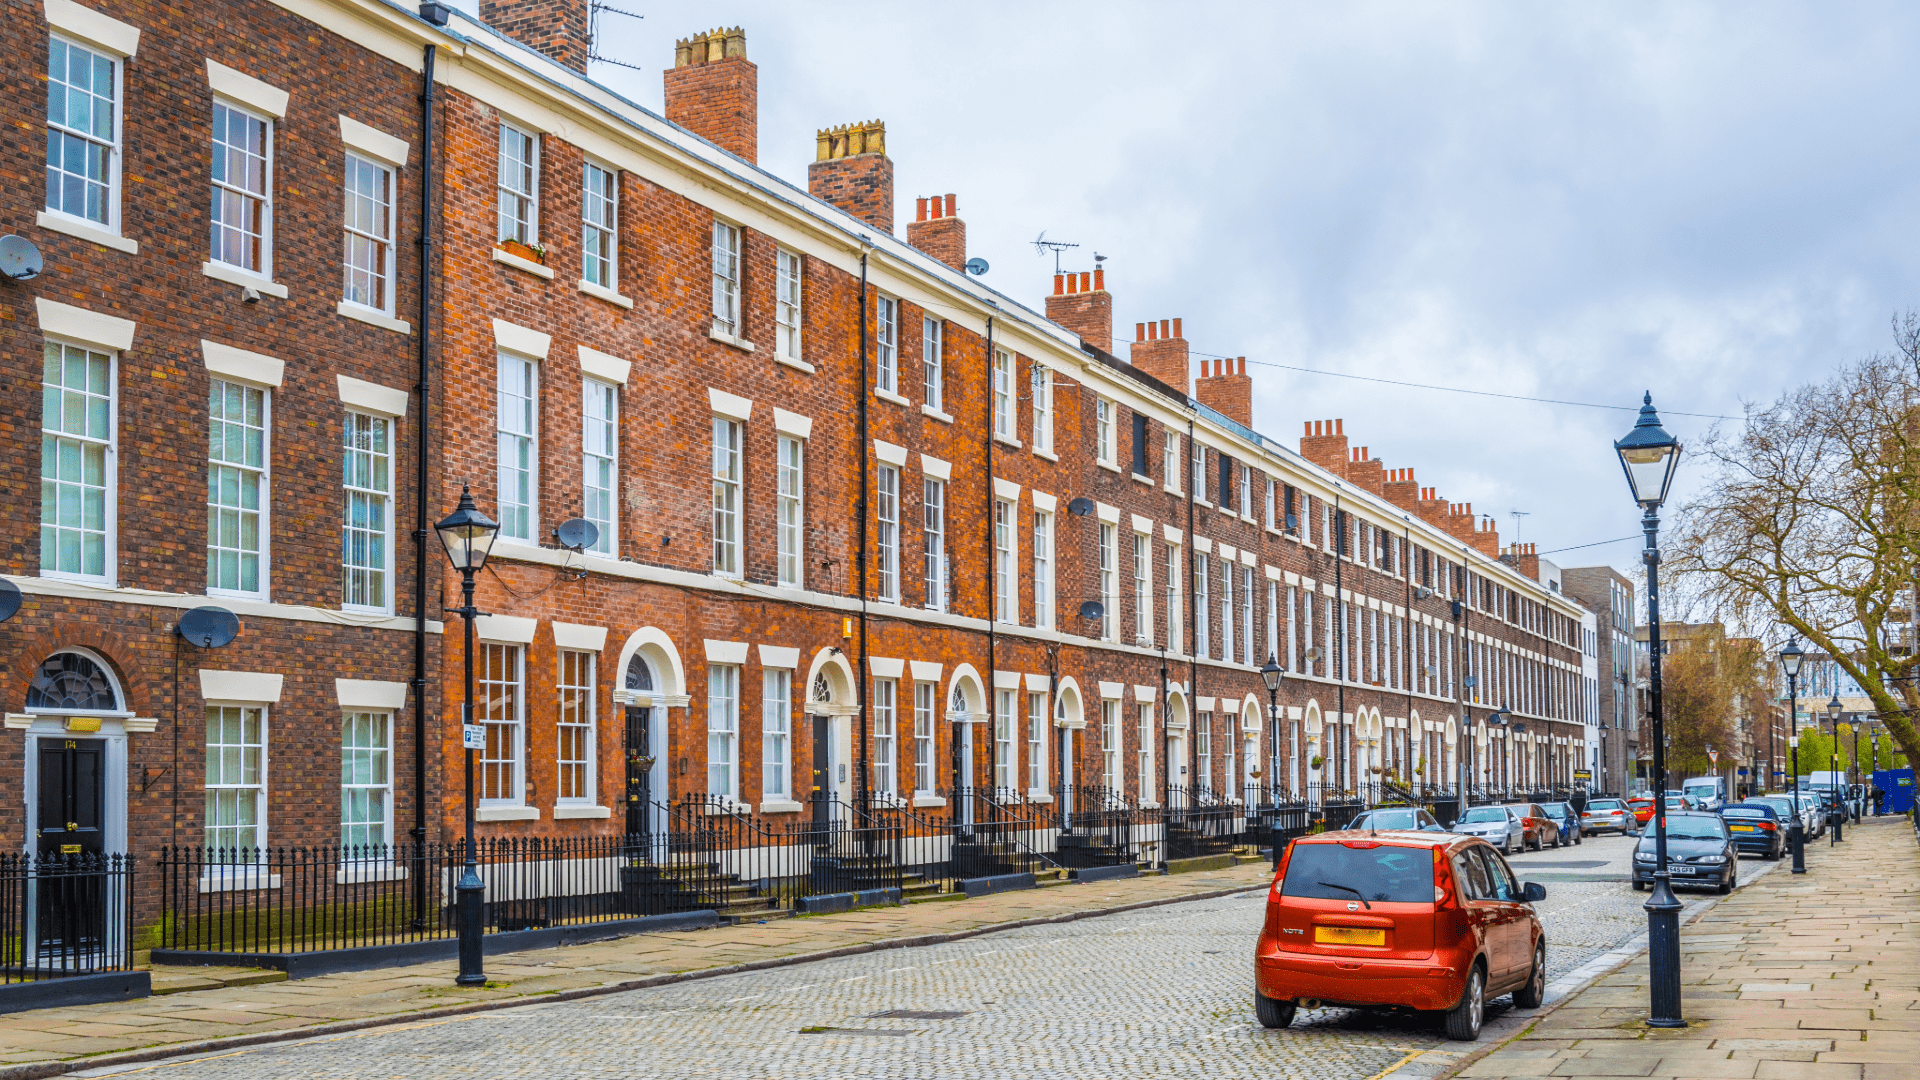 A traditional Georgian terrace on a cobbled street in the UK, with rows of red brick houses, white framed windows, and black doors, under an overcast sky.